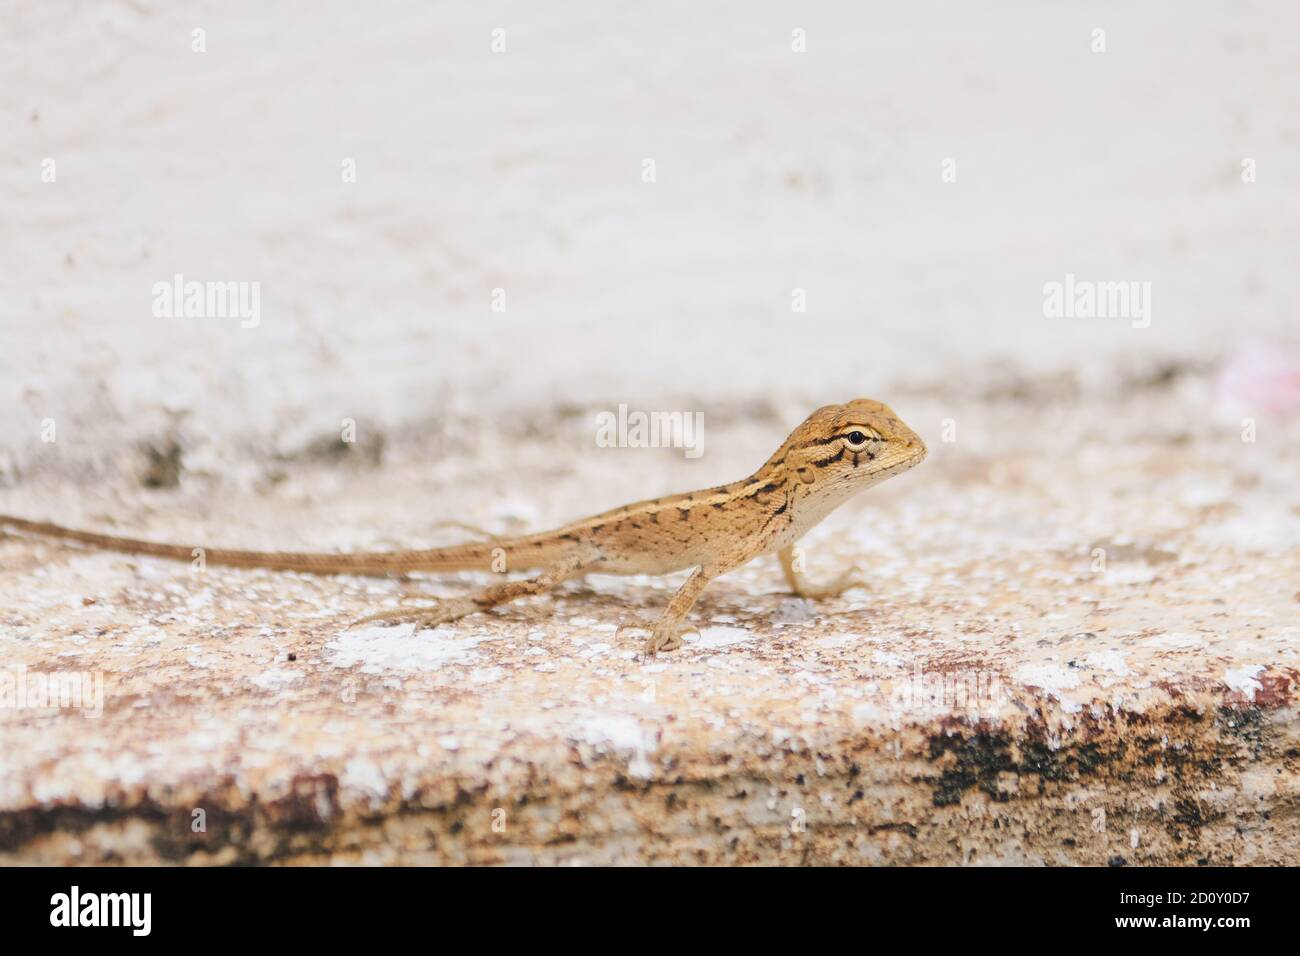 Baby Oriental Garden Lizard (Calotes versicolor) on the leaves. Found widely in Asian countries. camouflage garden lizards. Close up chameleon details Stock Photo